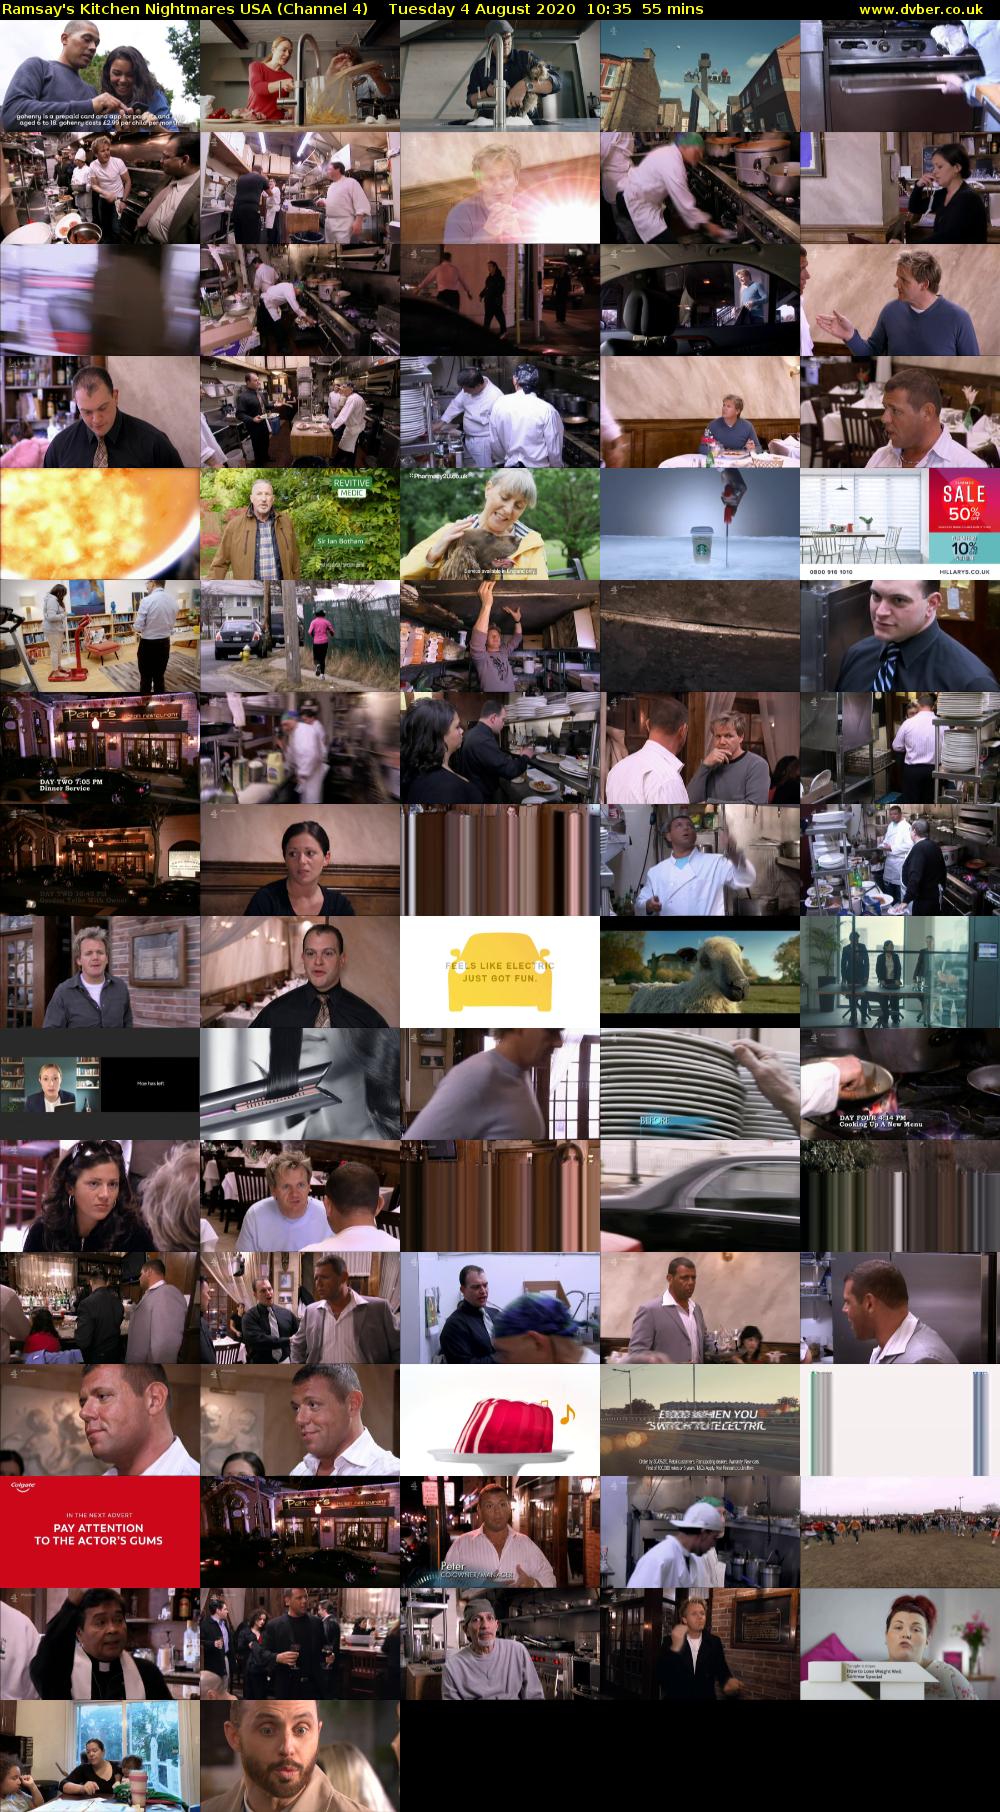 Ramsay's Kitchen Nightmares USA (Channel 4) Tuesday 4 August 2020 10:35 - 11:30